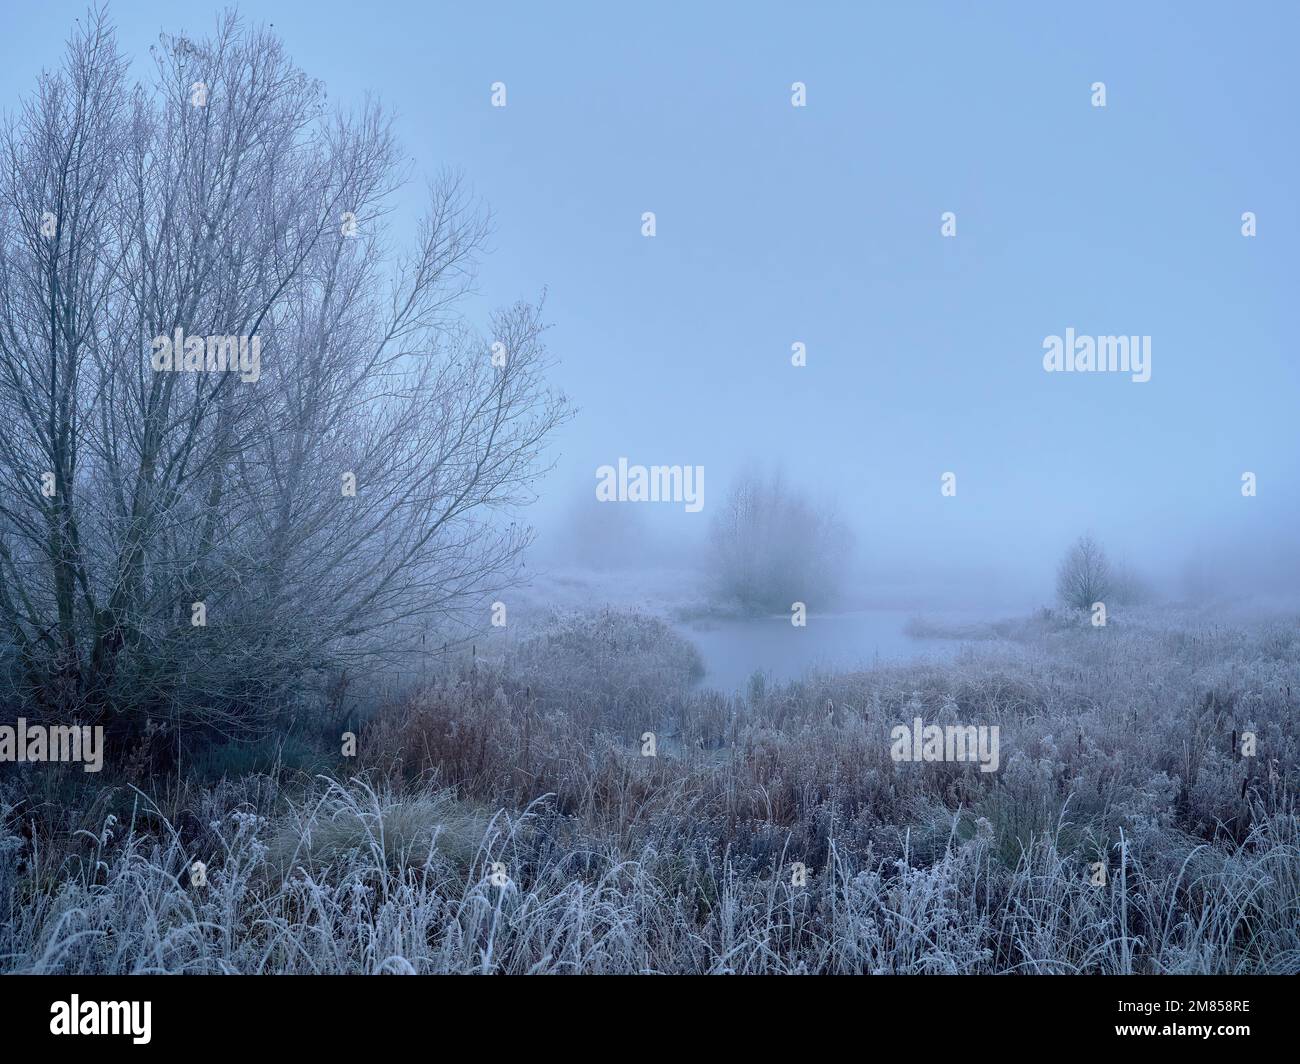 Winter’s arrival in the UK, with the cold snap and mist turning the familiar lakeside woodland landscape into a dream-like, liminal space. Stock Photo